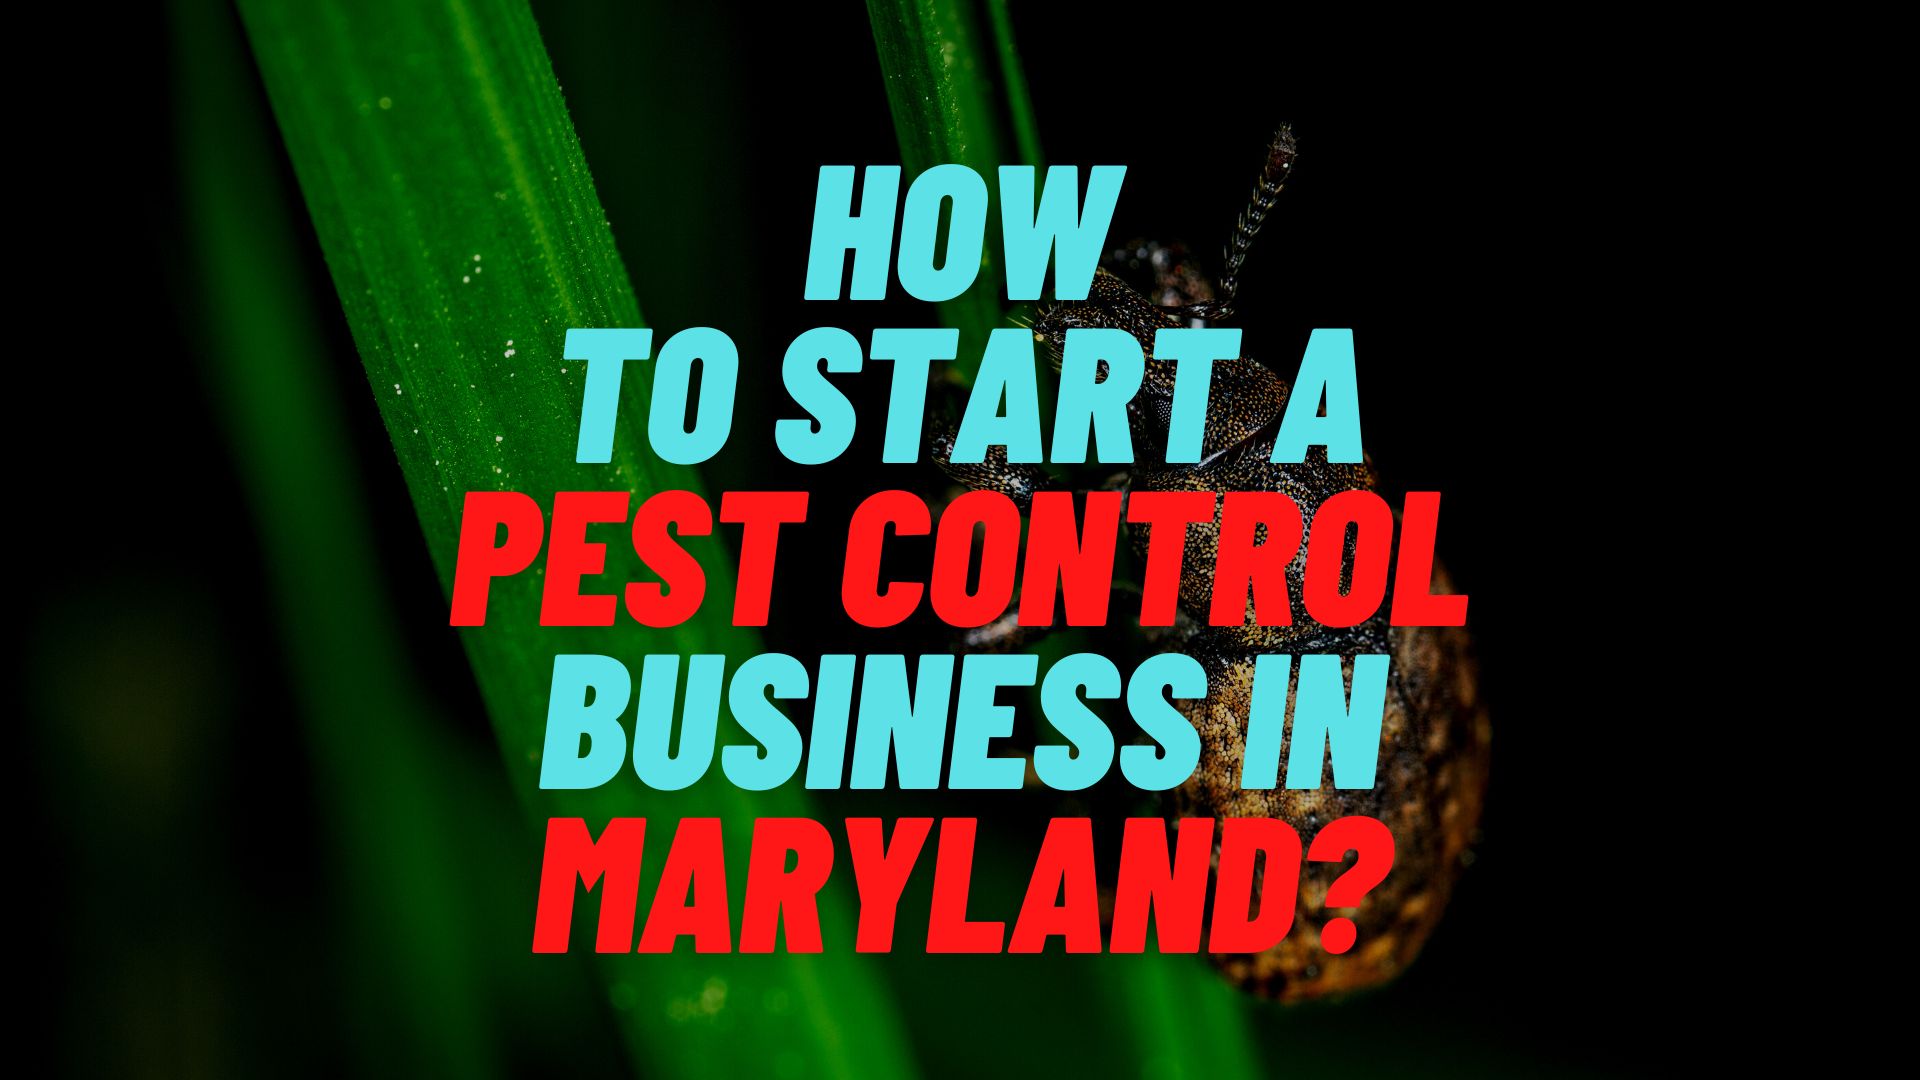 How to start a pest control business in Maryland?